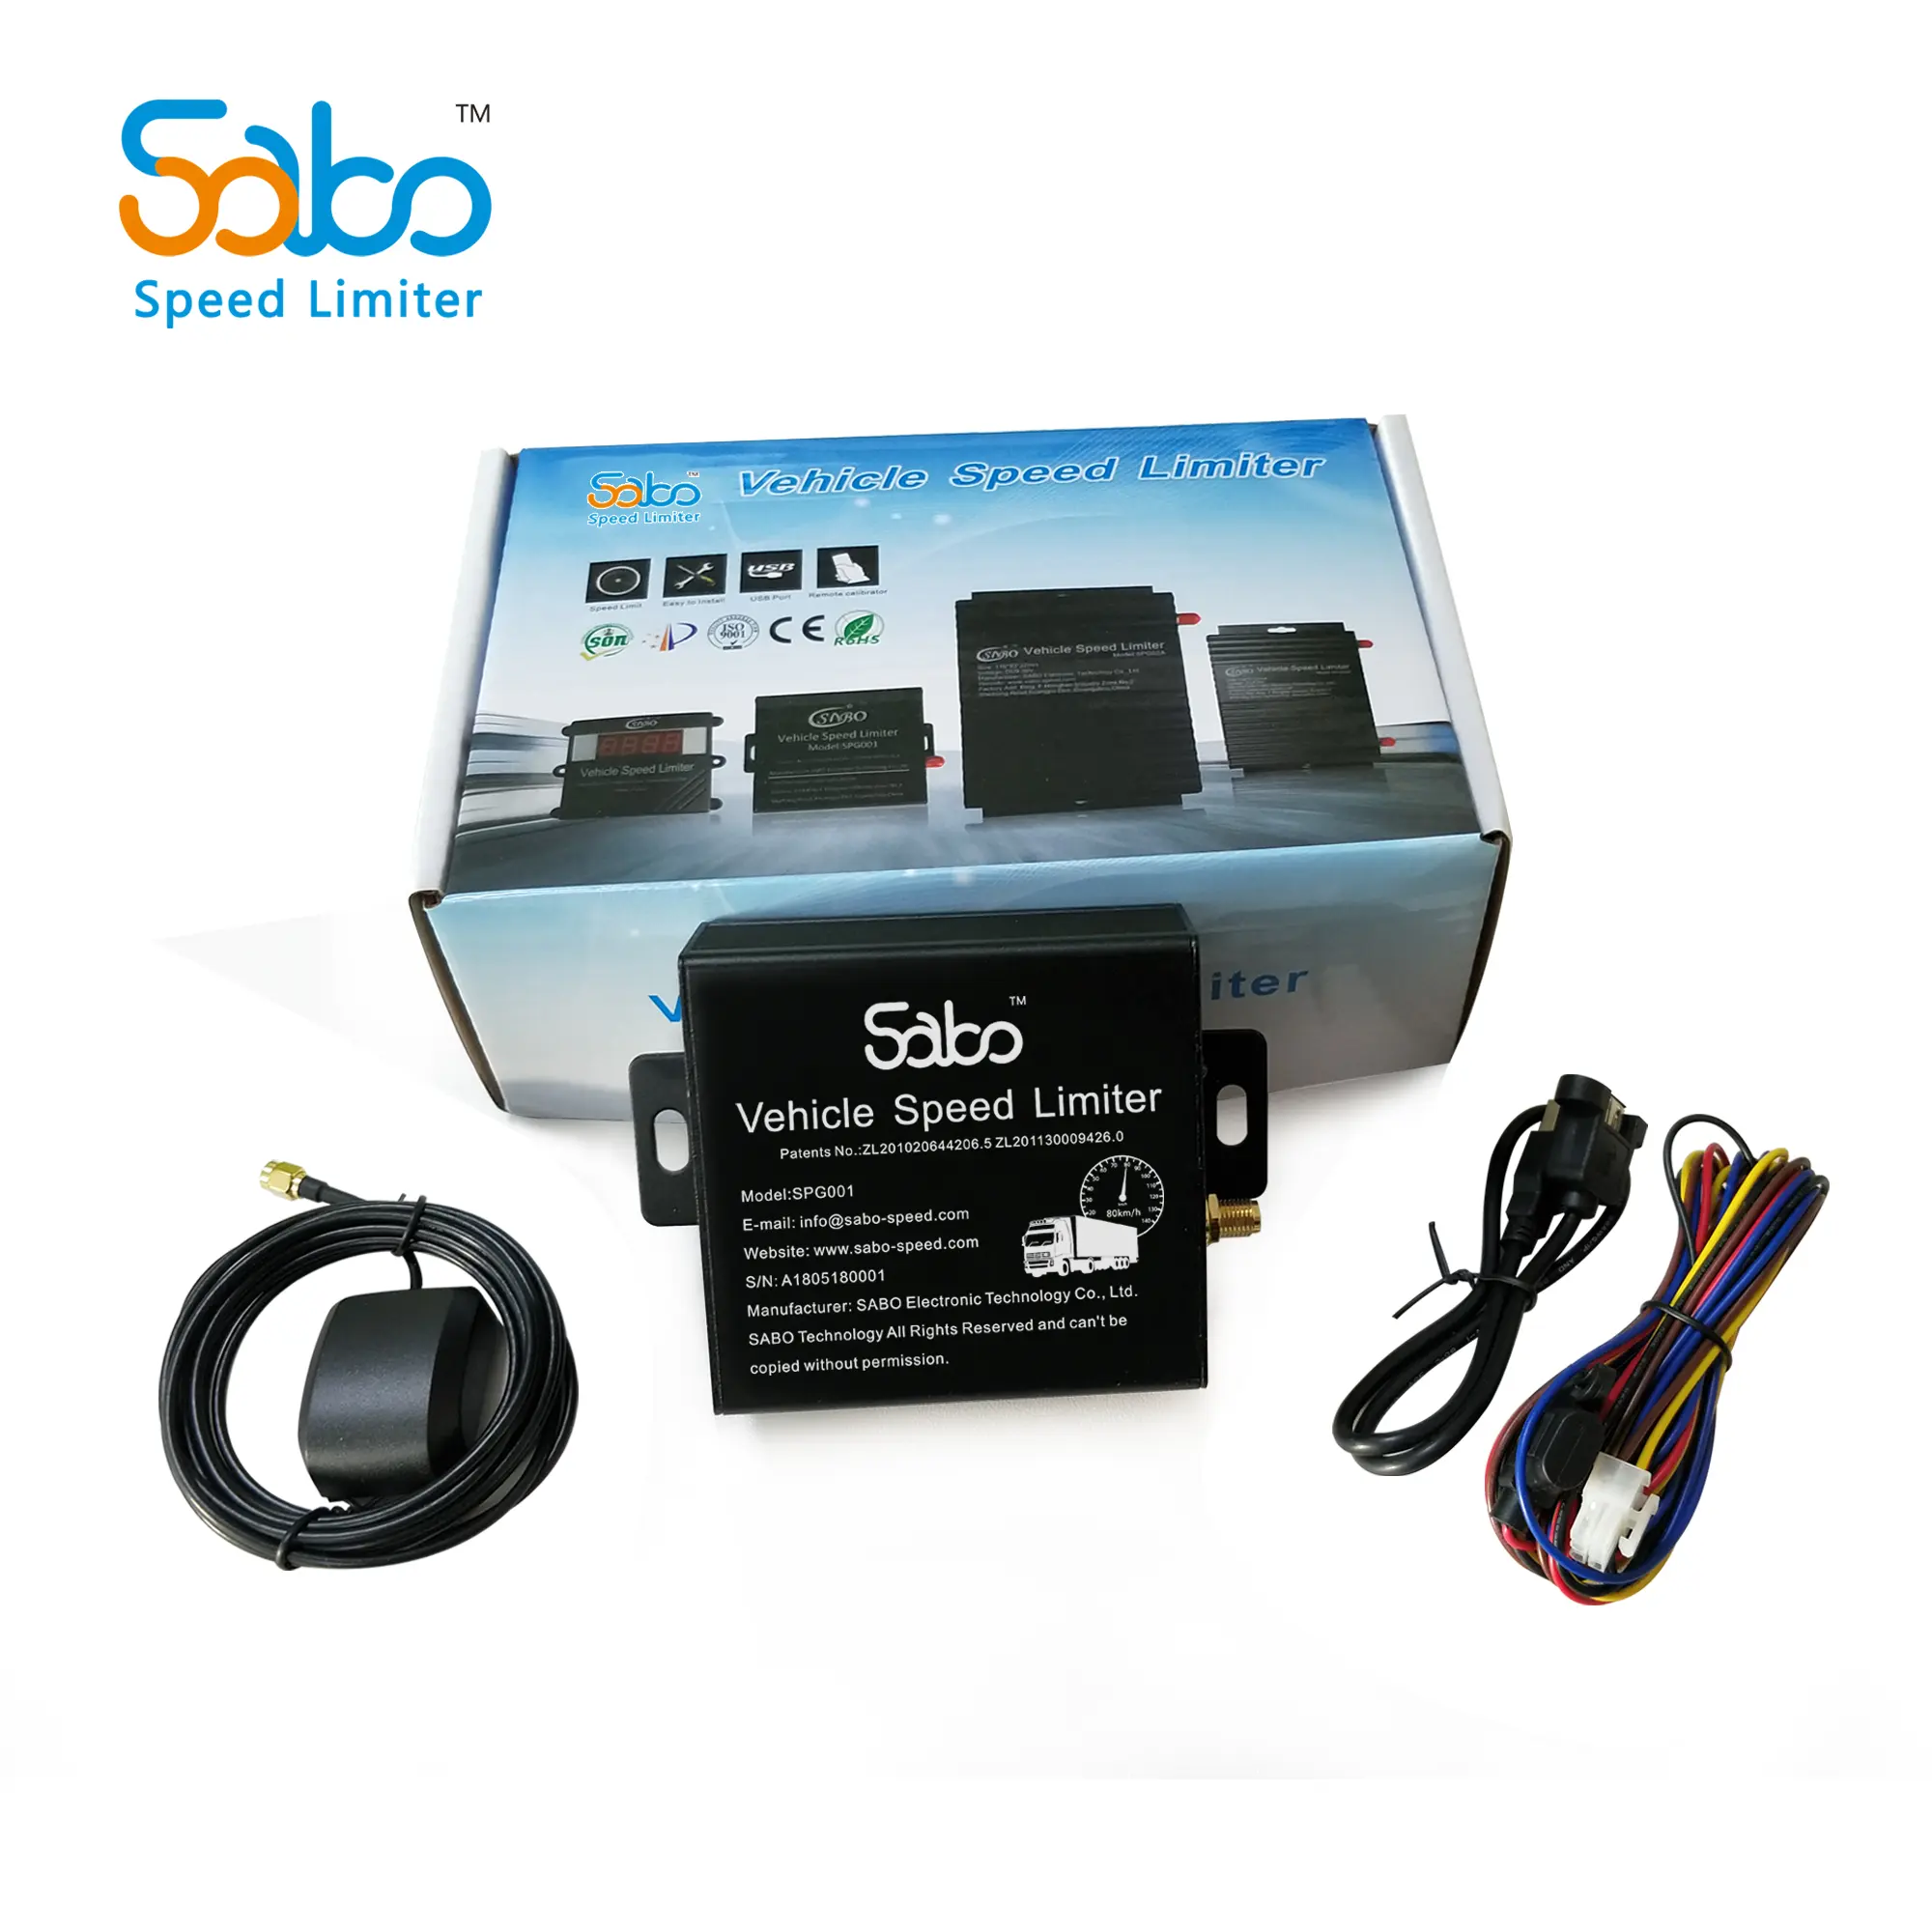 GPS Tracker new speed limiters device to control car speed on commercial vehicles 2G GPS Tracker